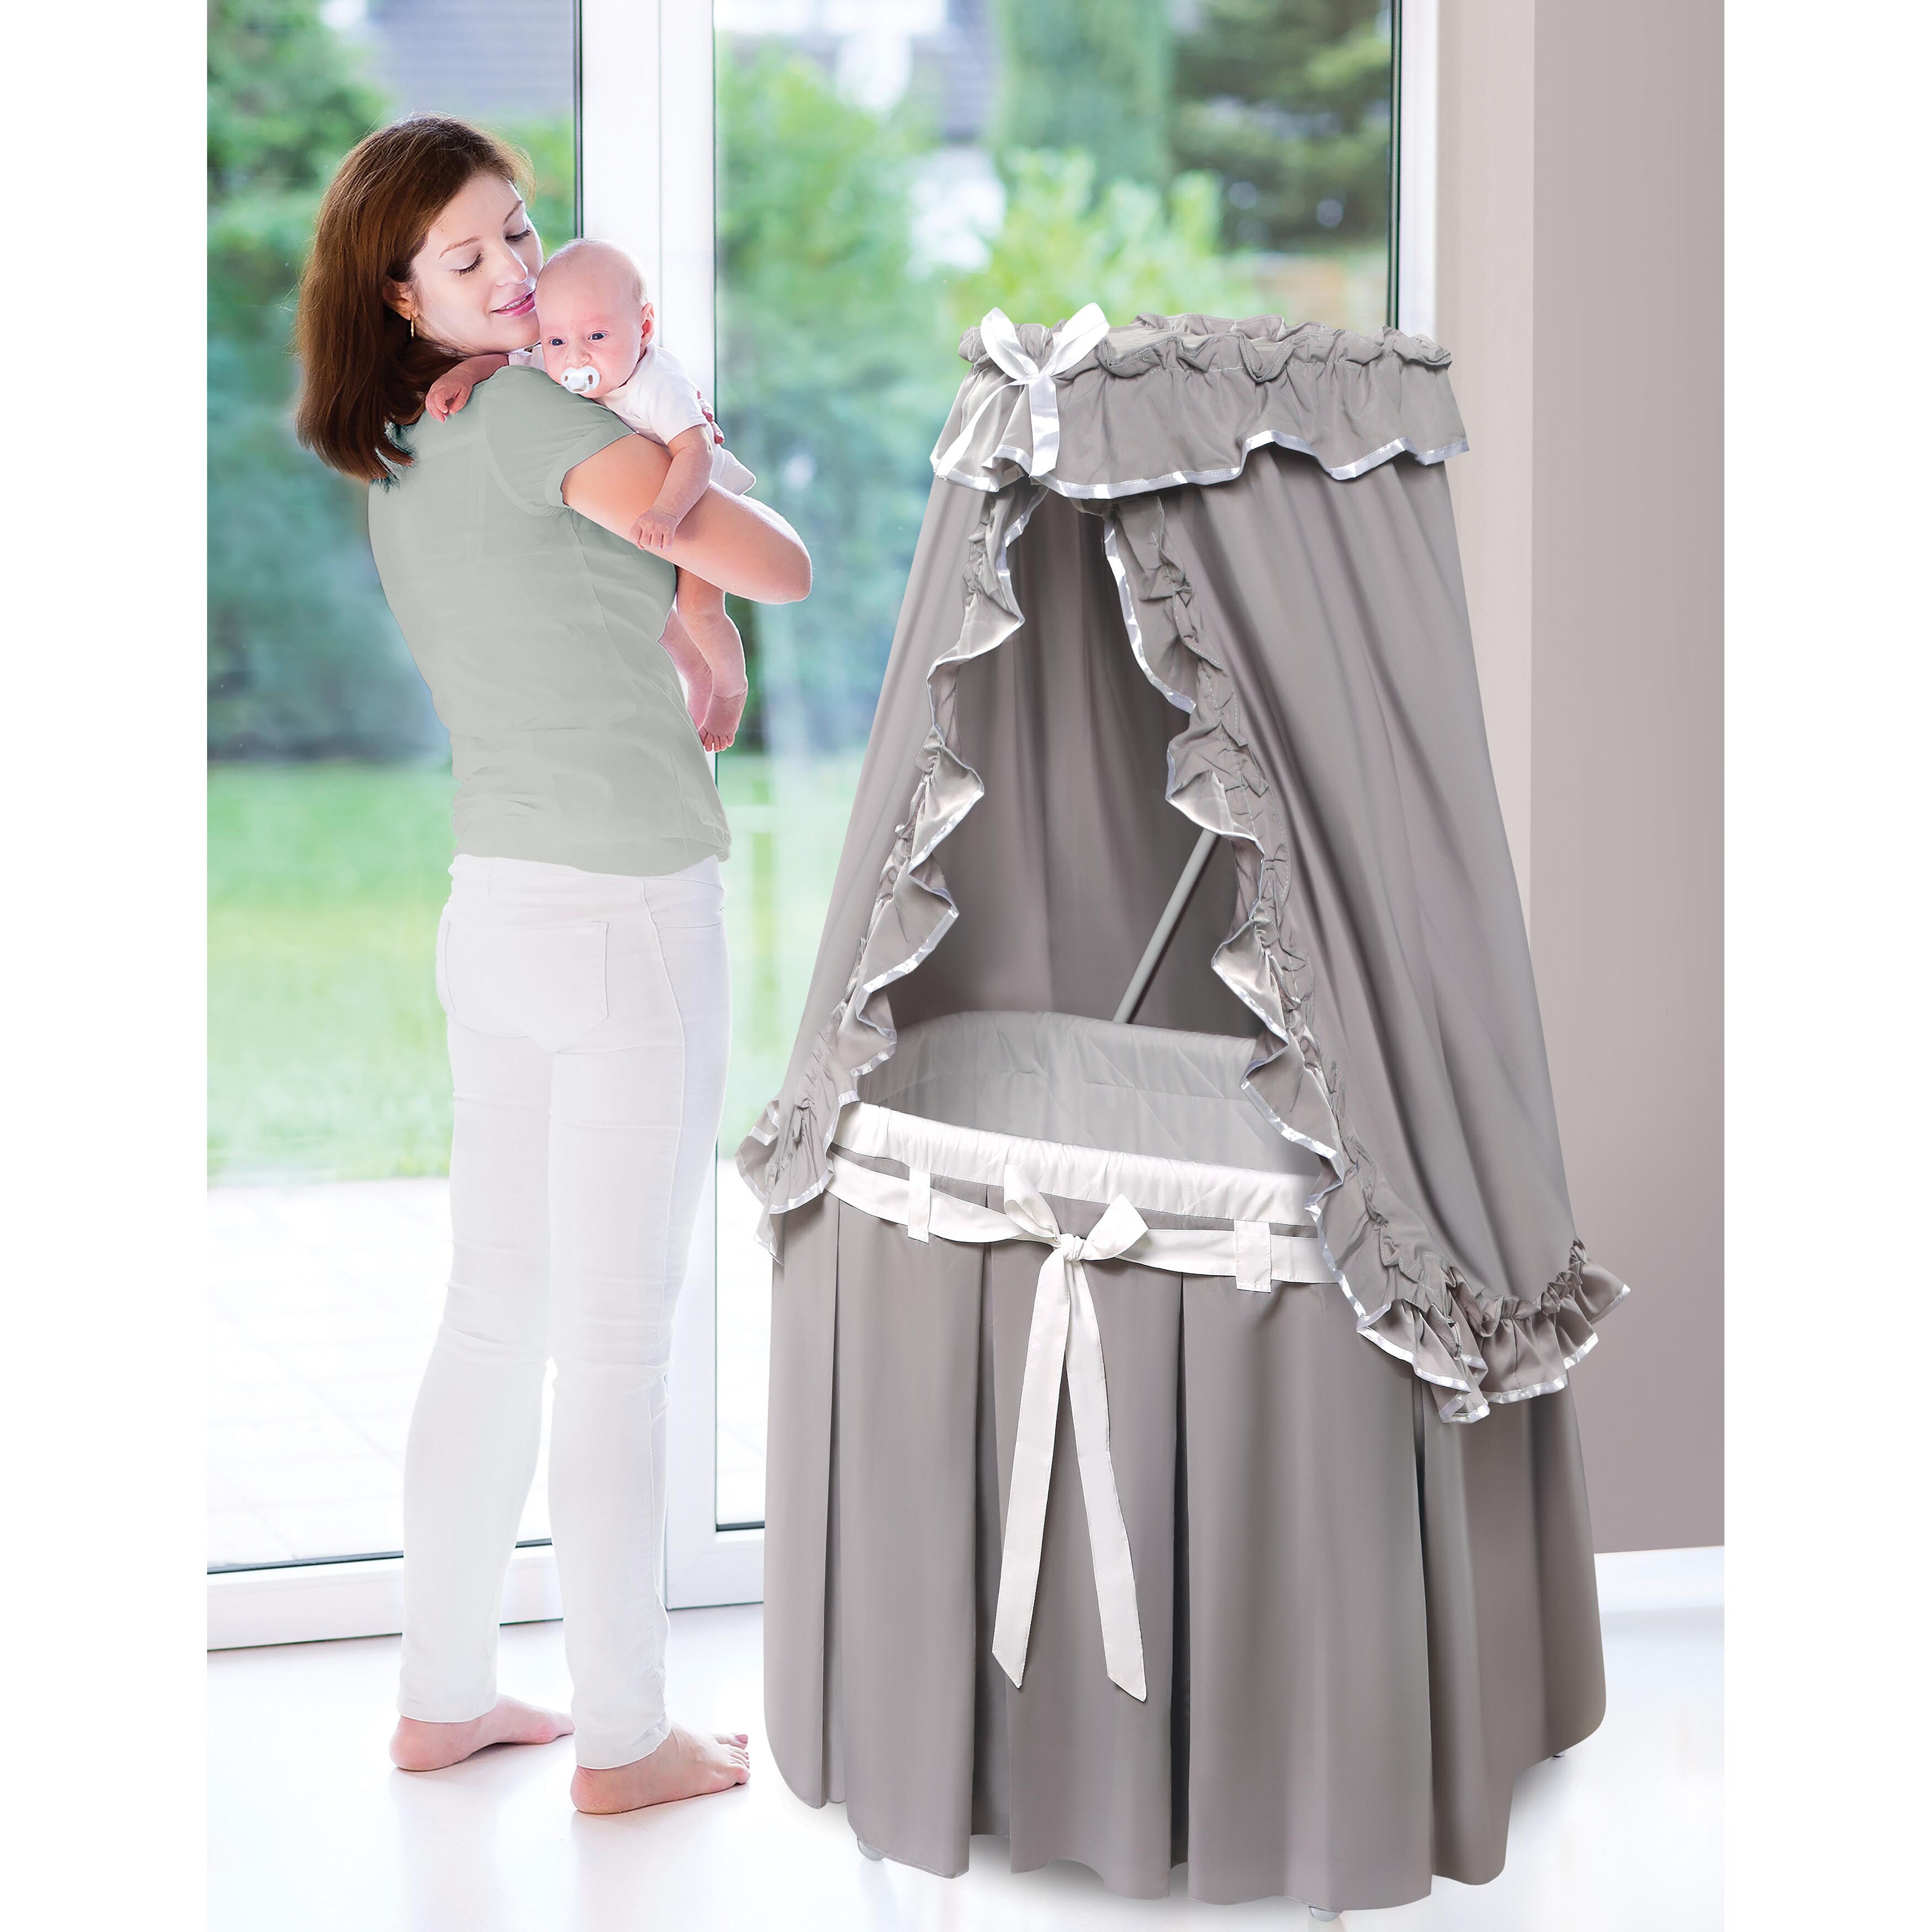 grey and white bassinet